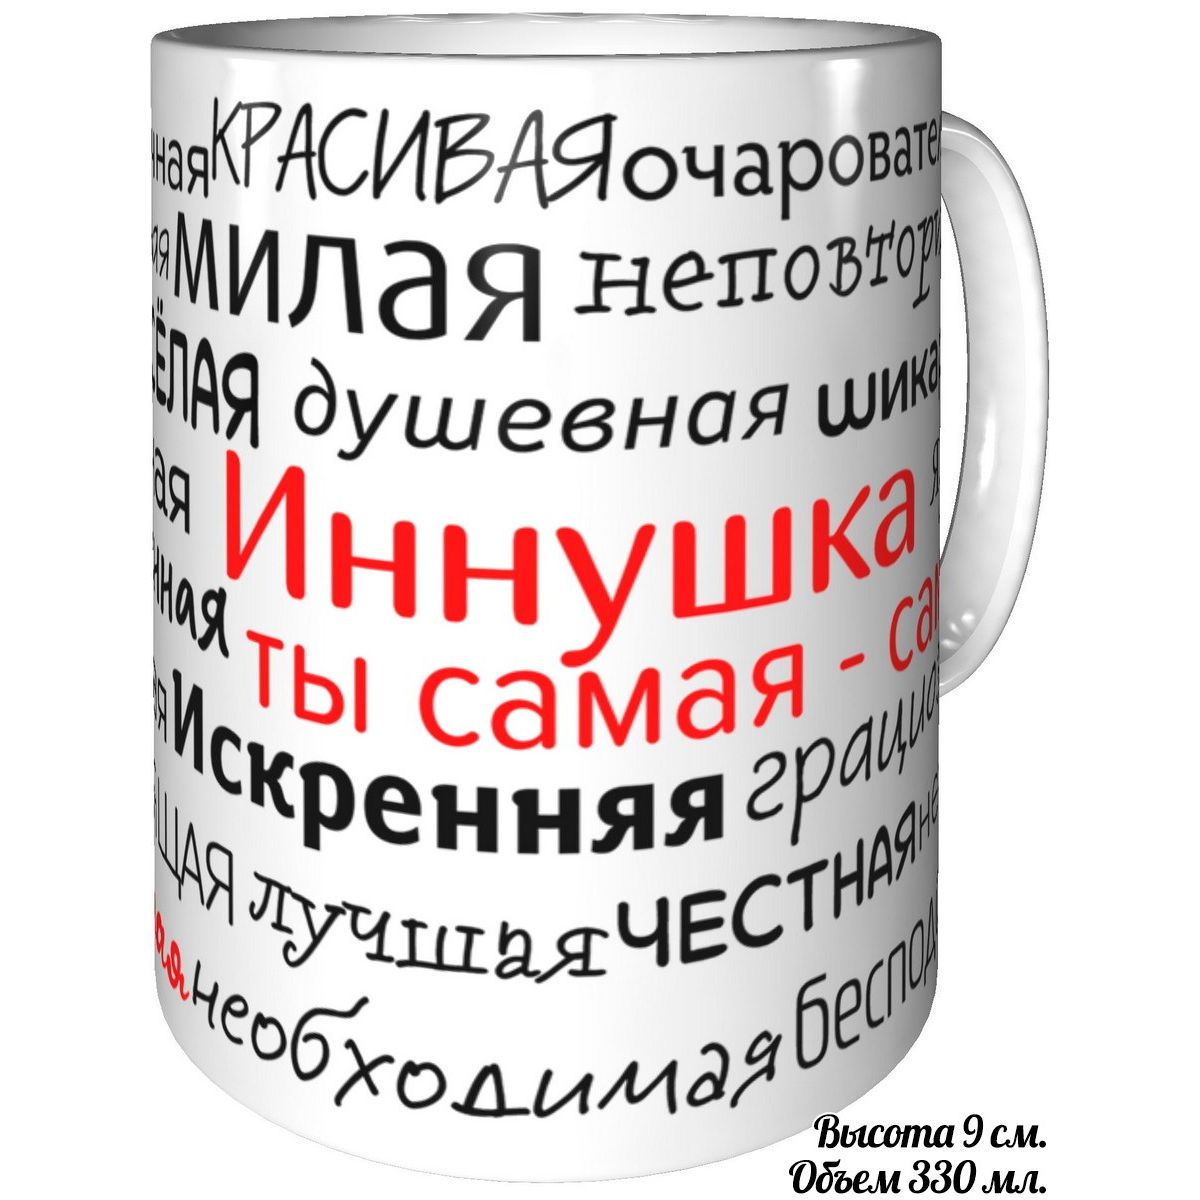 Кружка с надписью AV Gifts Compliments Innushka, You Are Truly the Best.